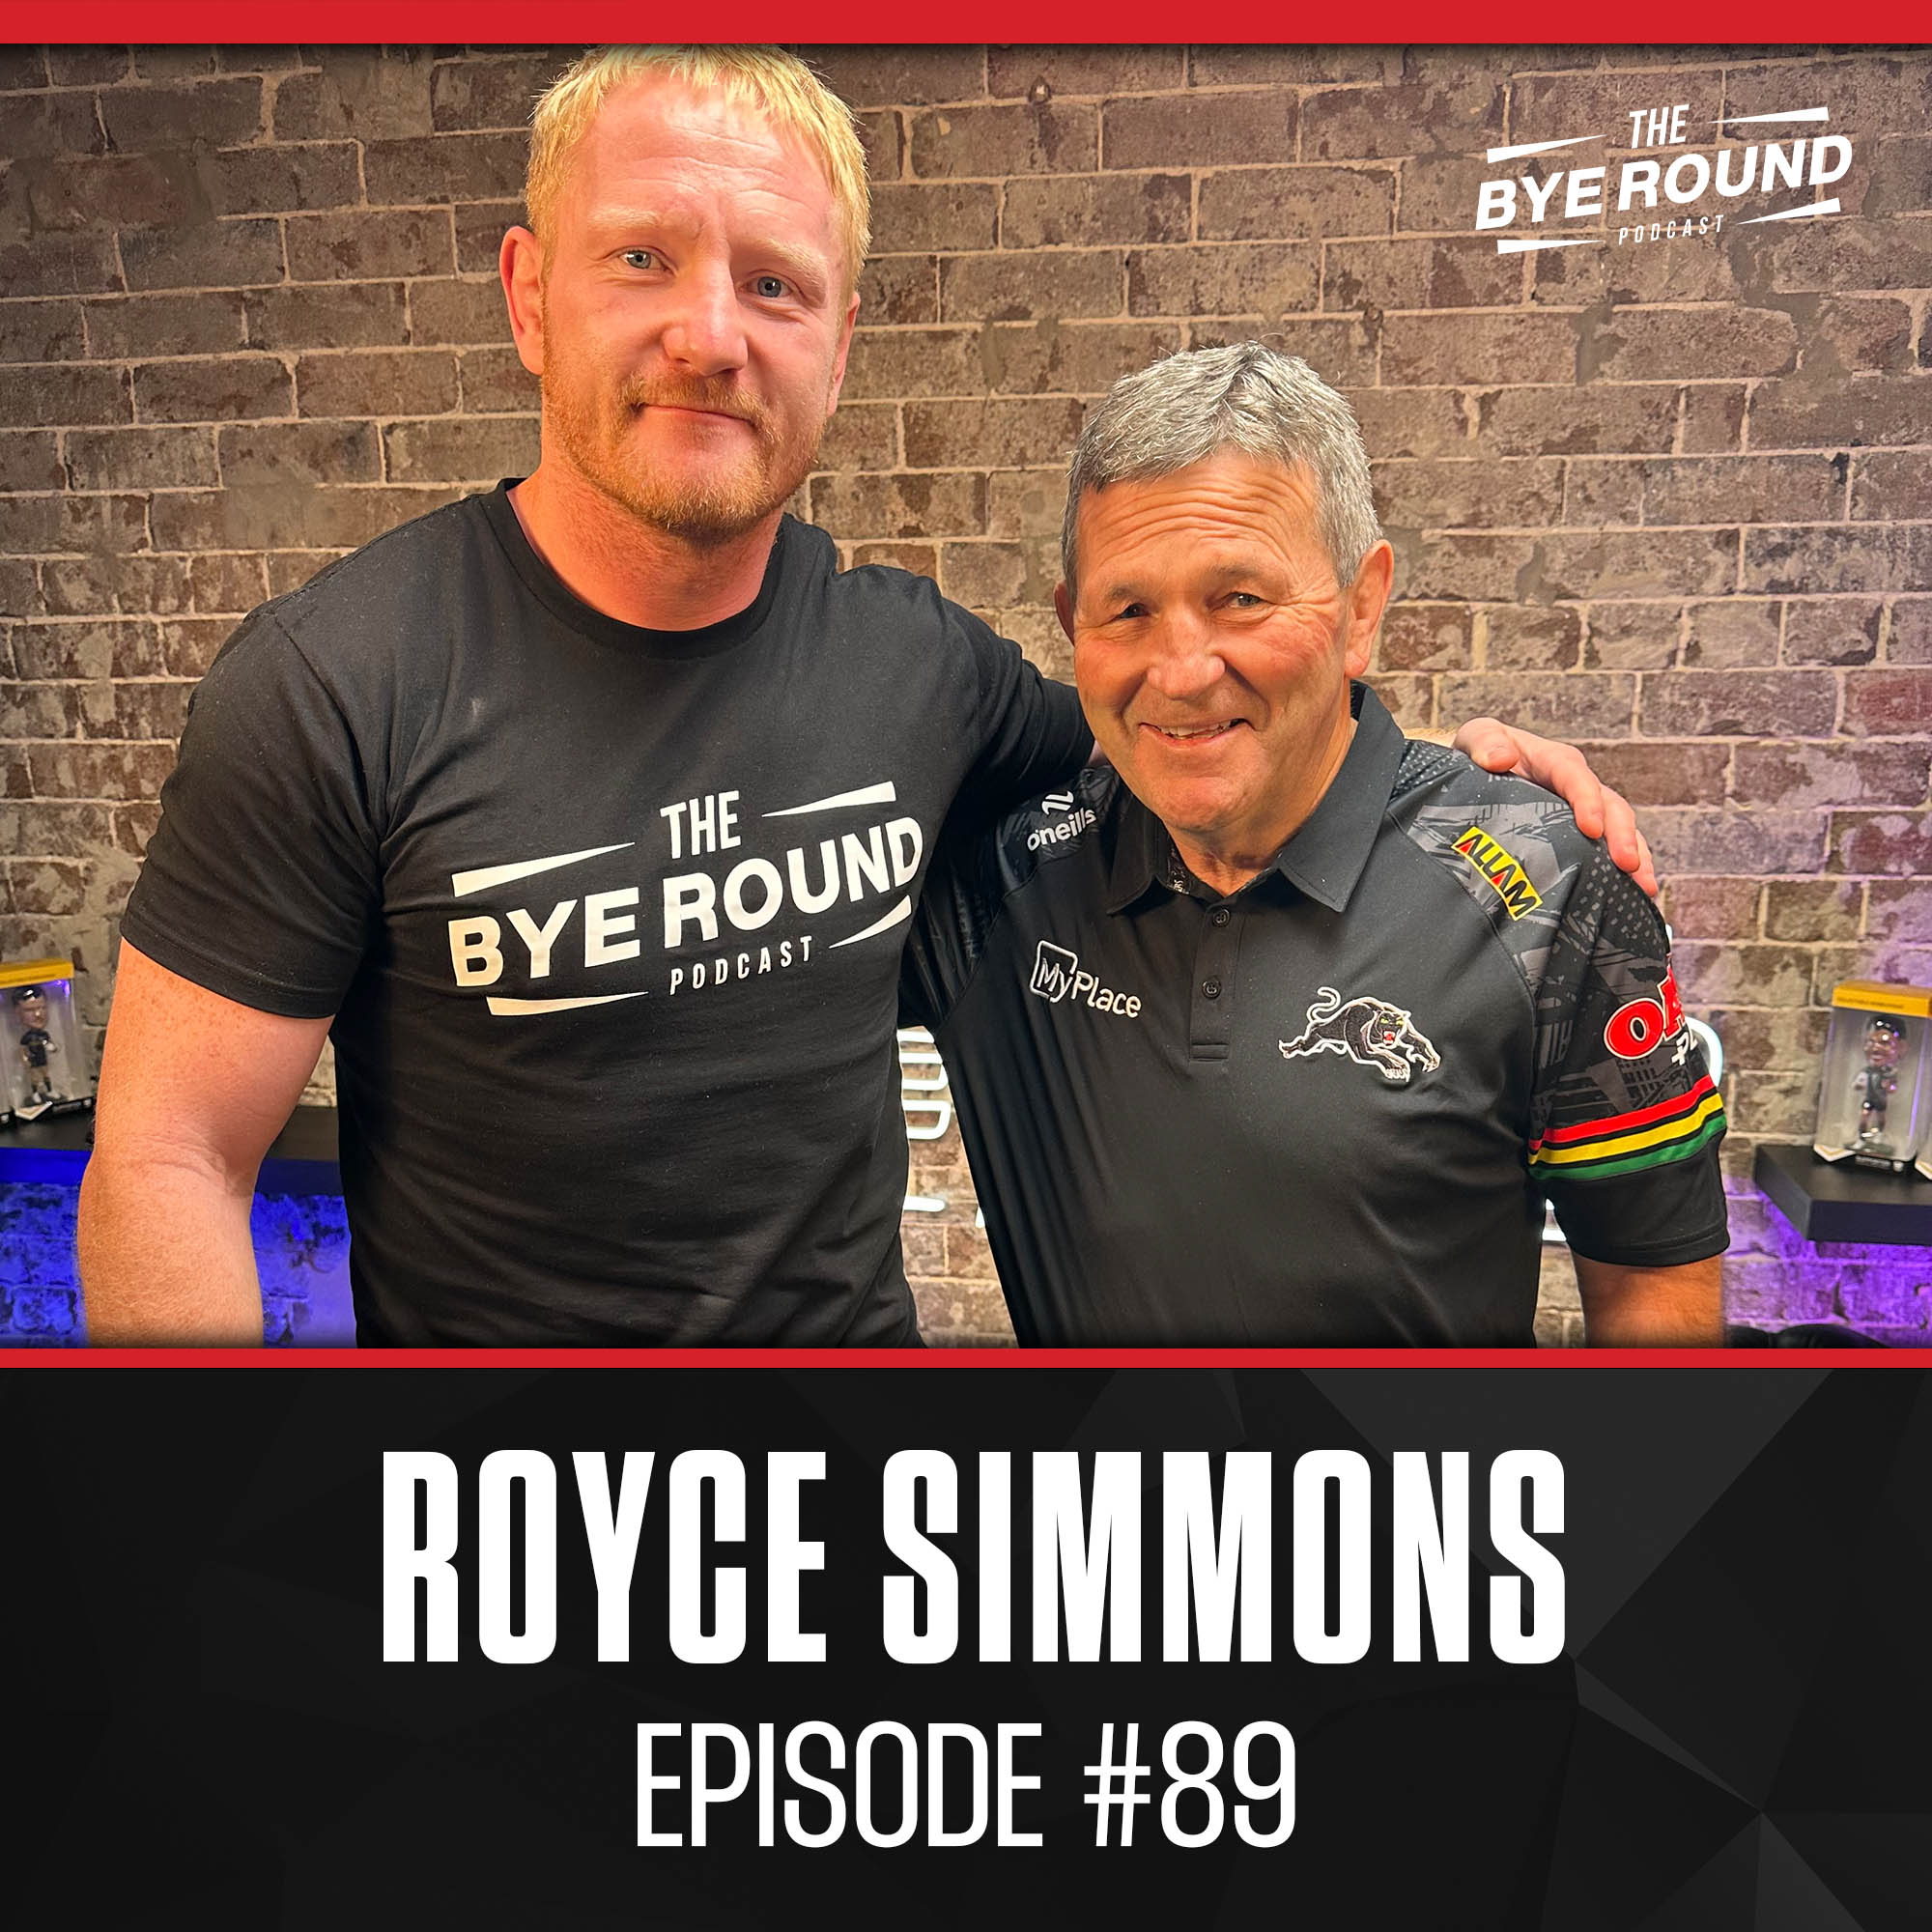 The King Of Penrith: Royce Simmons